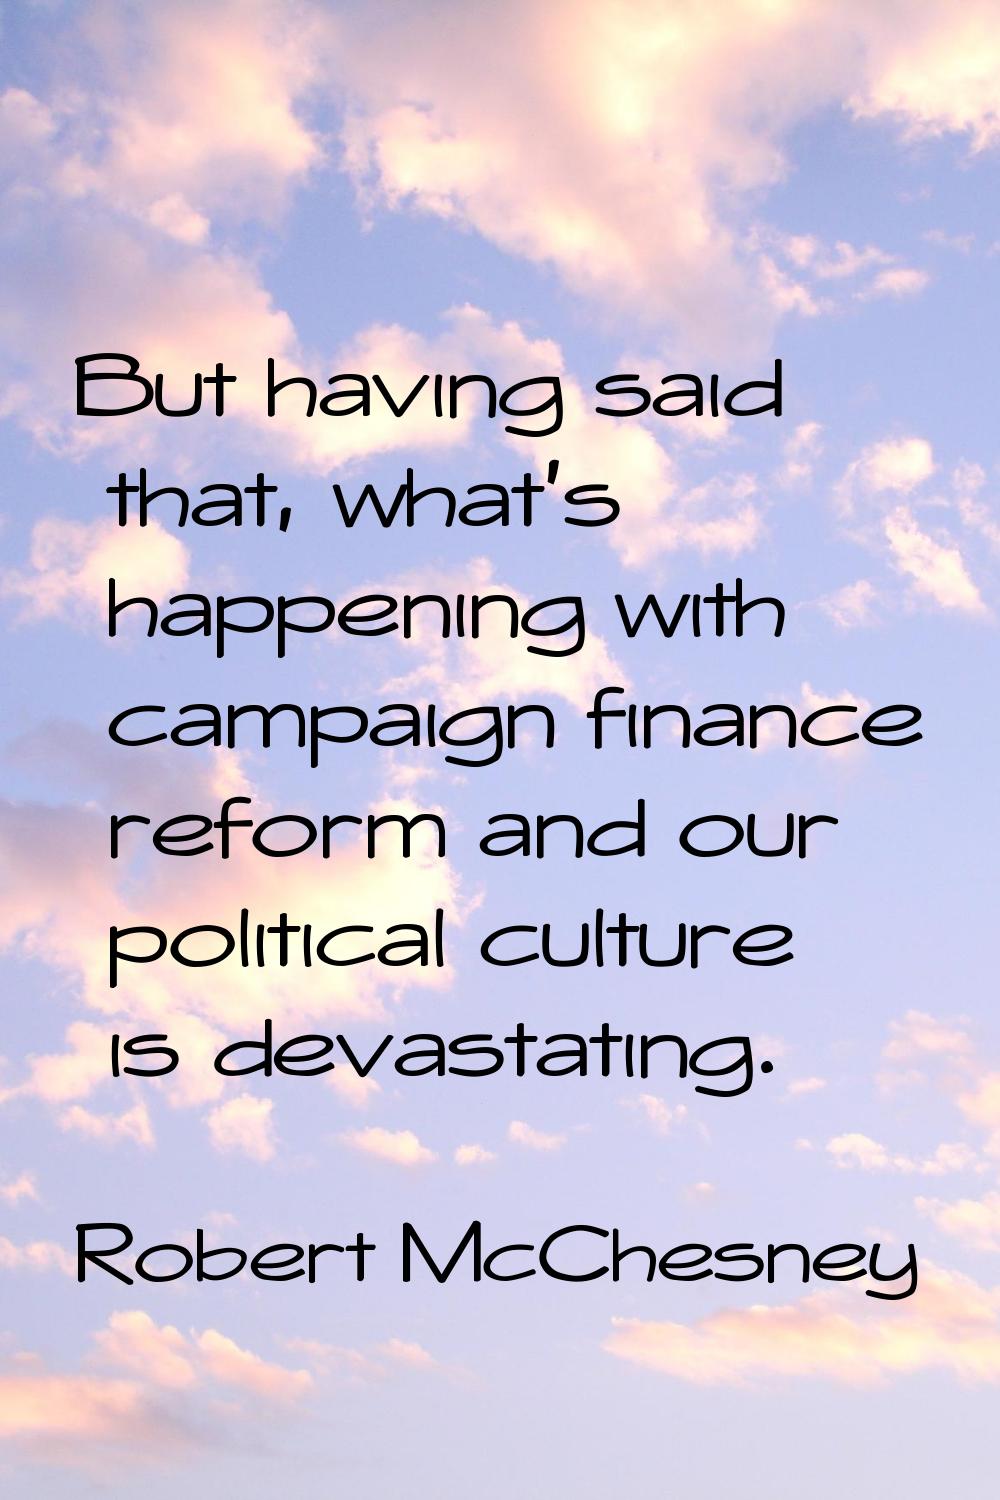 But having said that, what's happening with campaign finance reform and our political culture is de